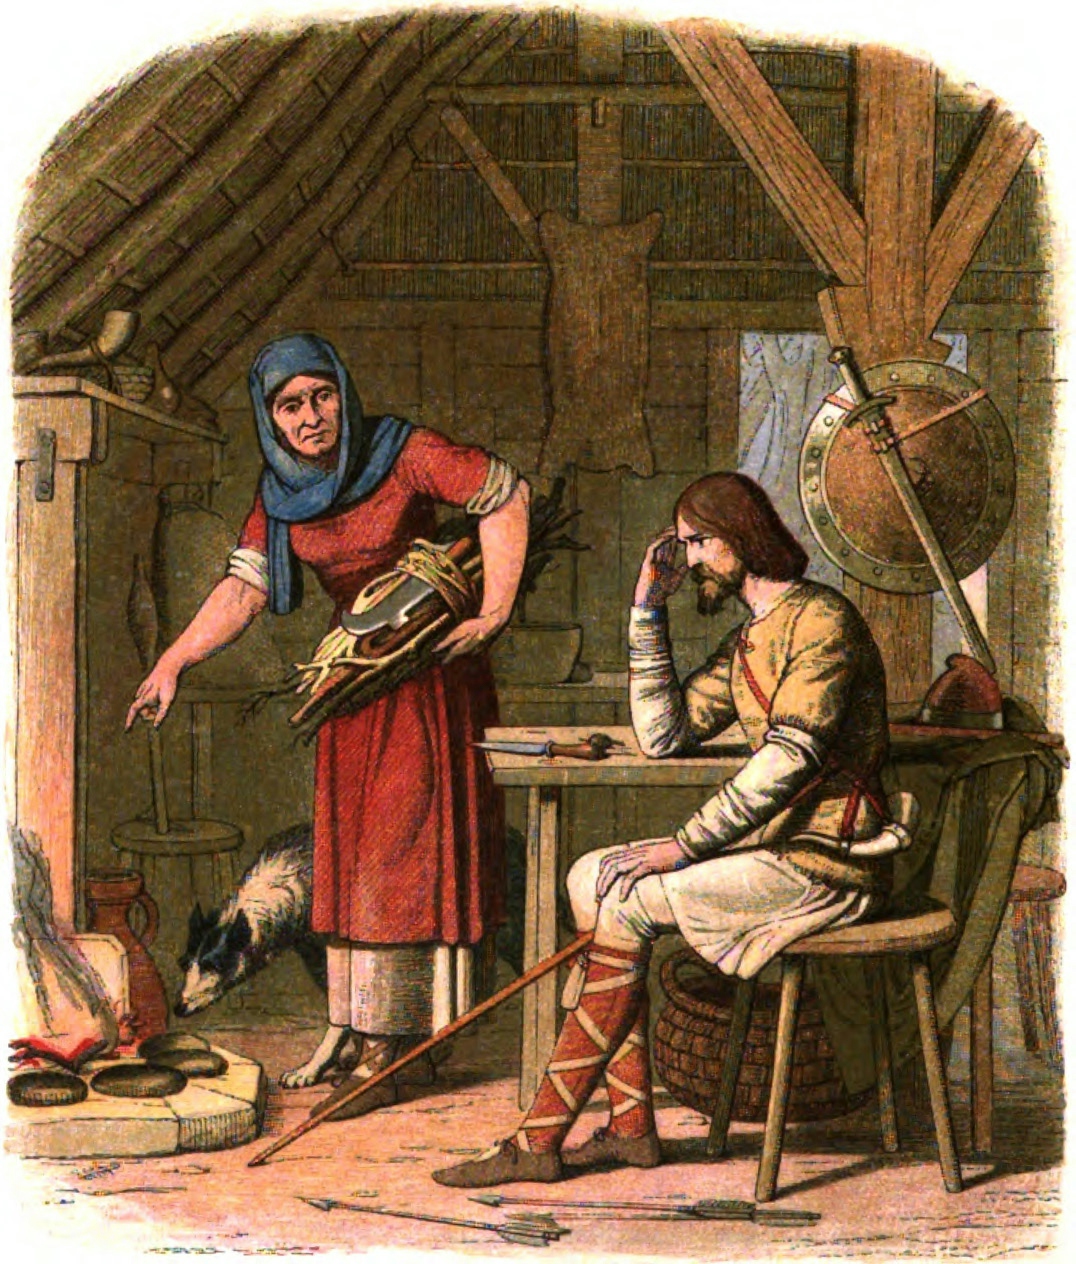 Artwork depicting King Alfred the Great being scolded by a peasant woman for burning her cakes. 

The artworks shows Alfred sat on a chair with his sword and shield behind him in a small peasant house. A woman is carrying a bunch of firewood and pointing angrily at her burnt cakes which are lying next to the fire. A black and white dog is smelling the cakes.